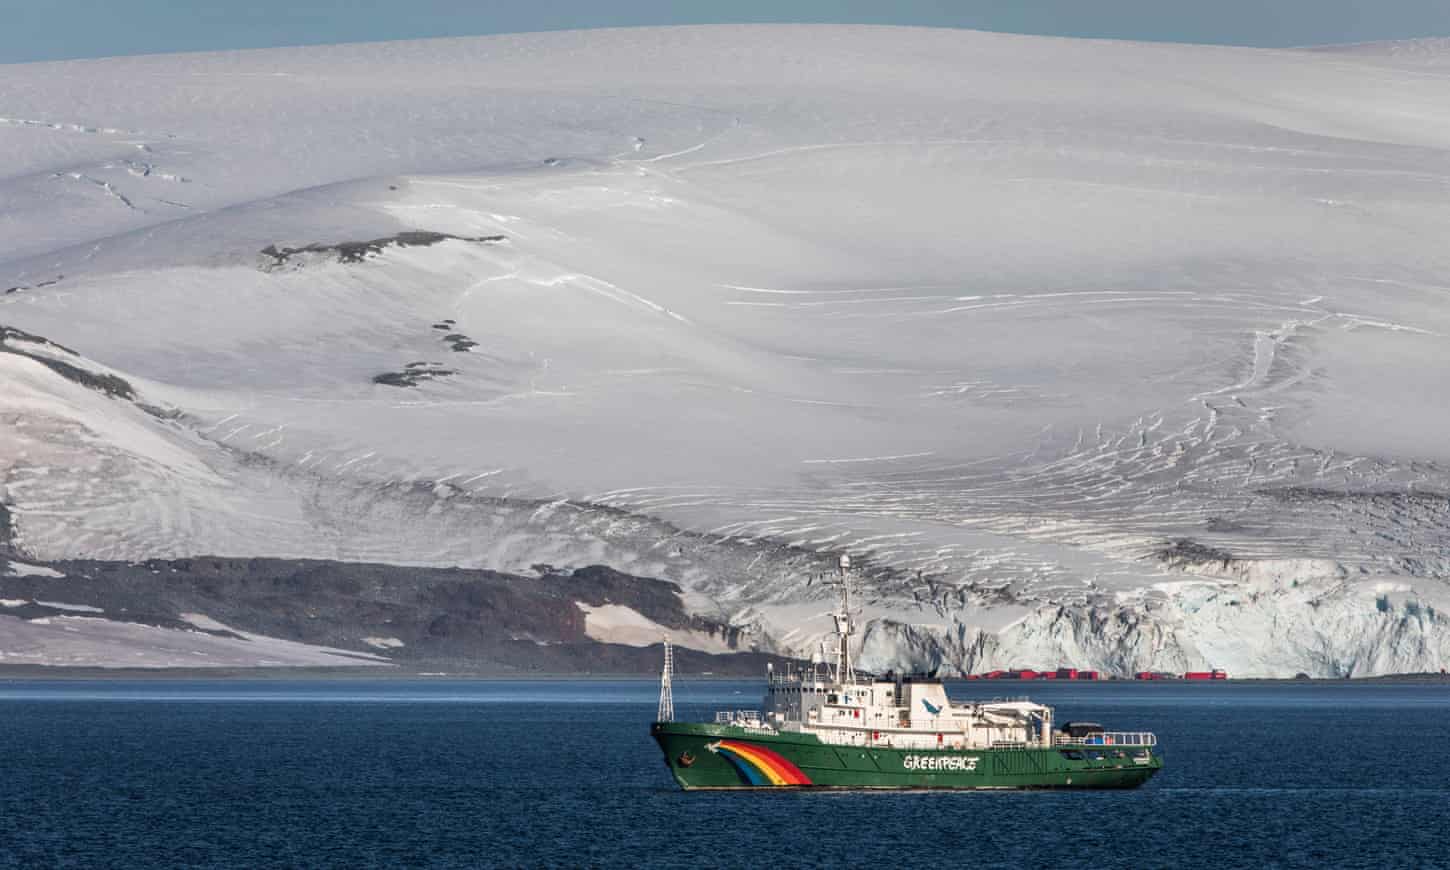 The beautiful south: our wild, vulnerable world, seen from a Greenpeace ship